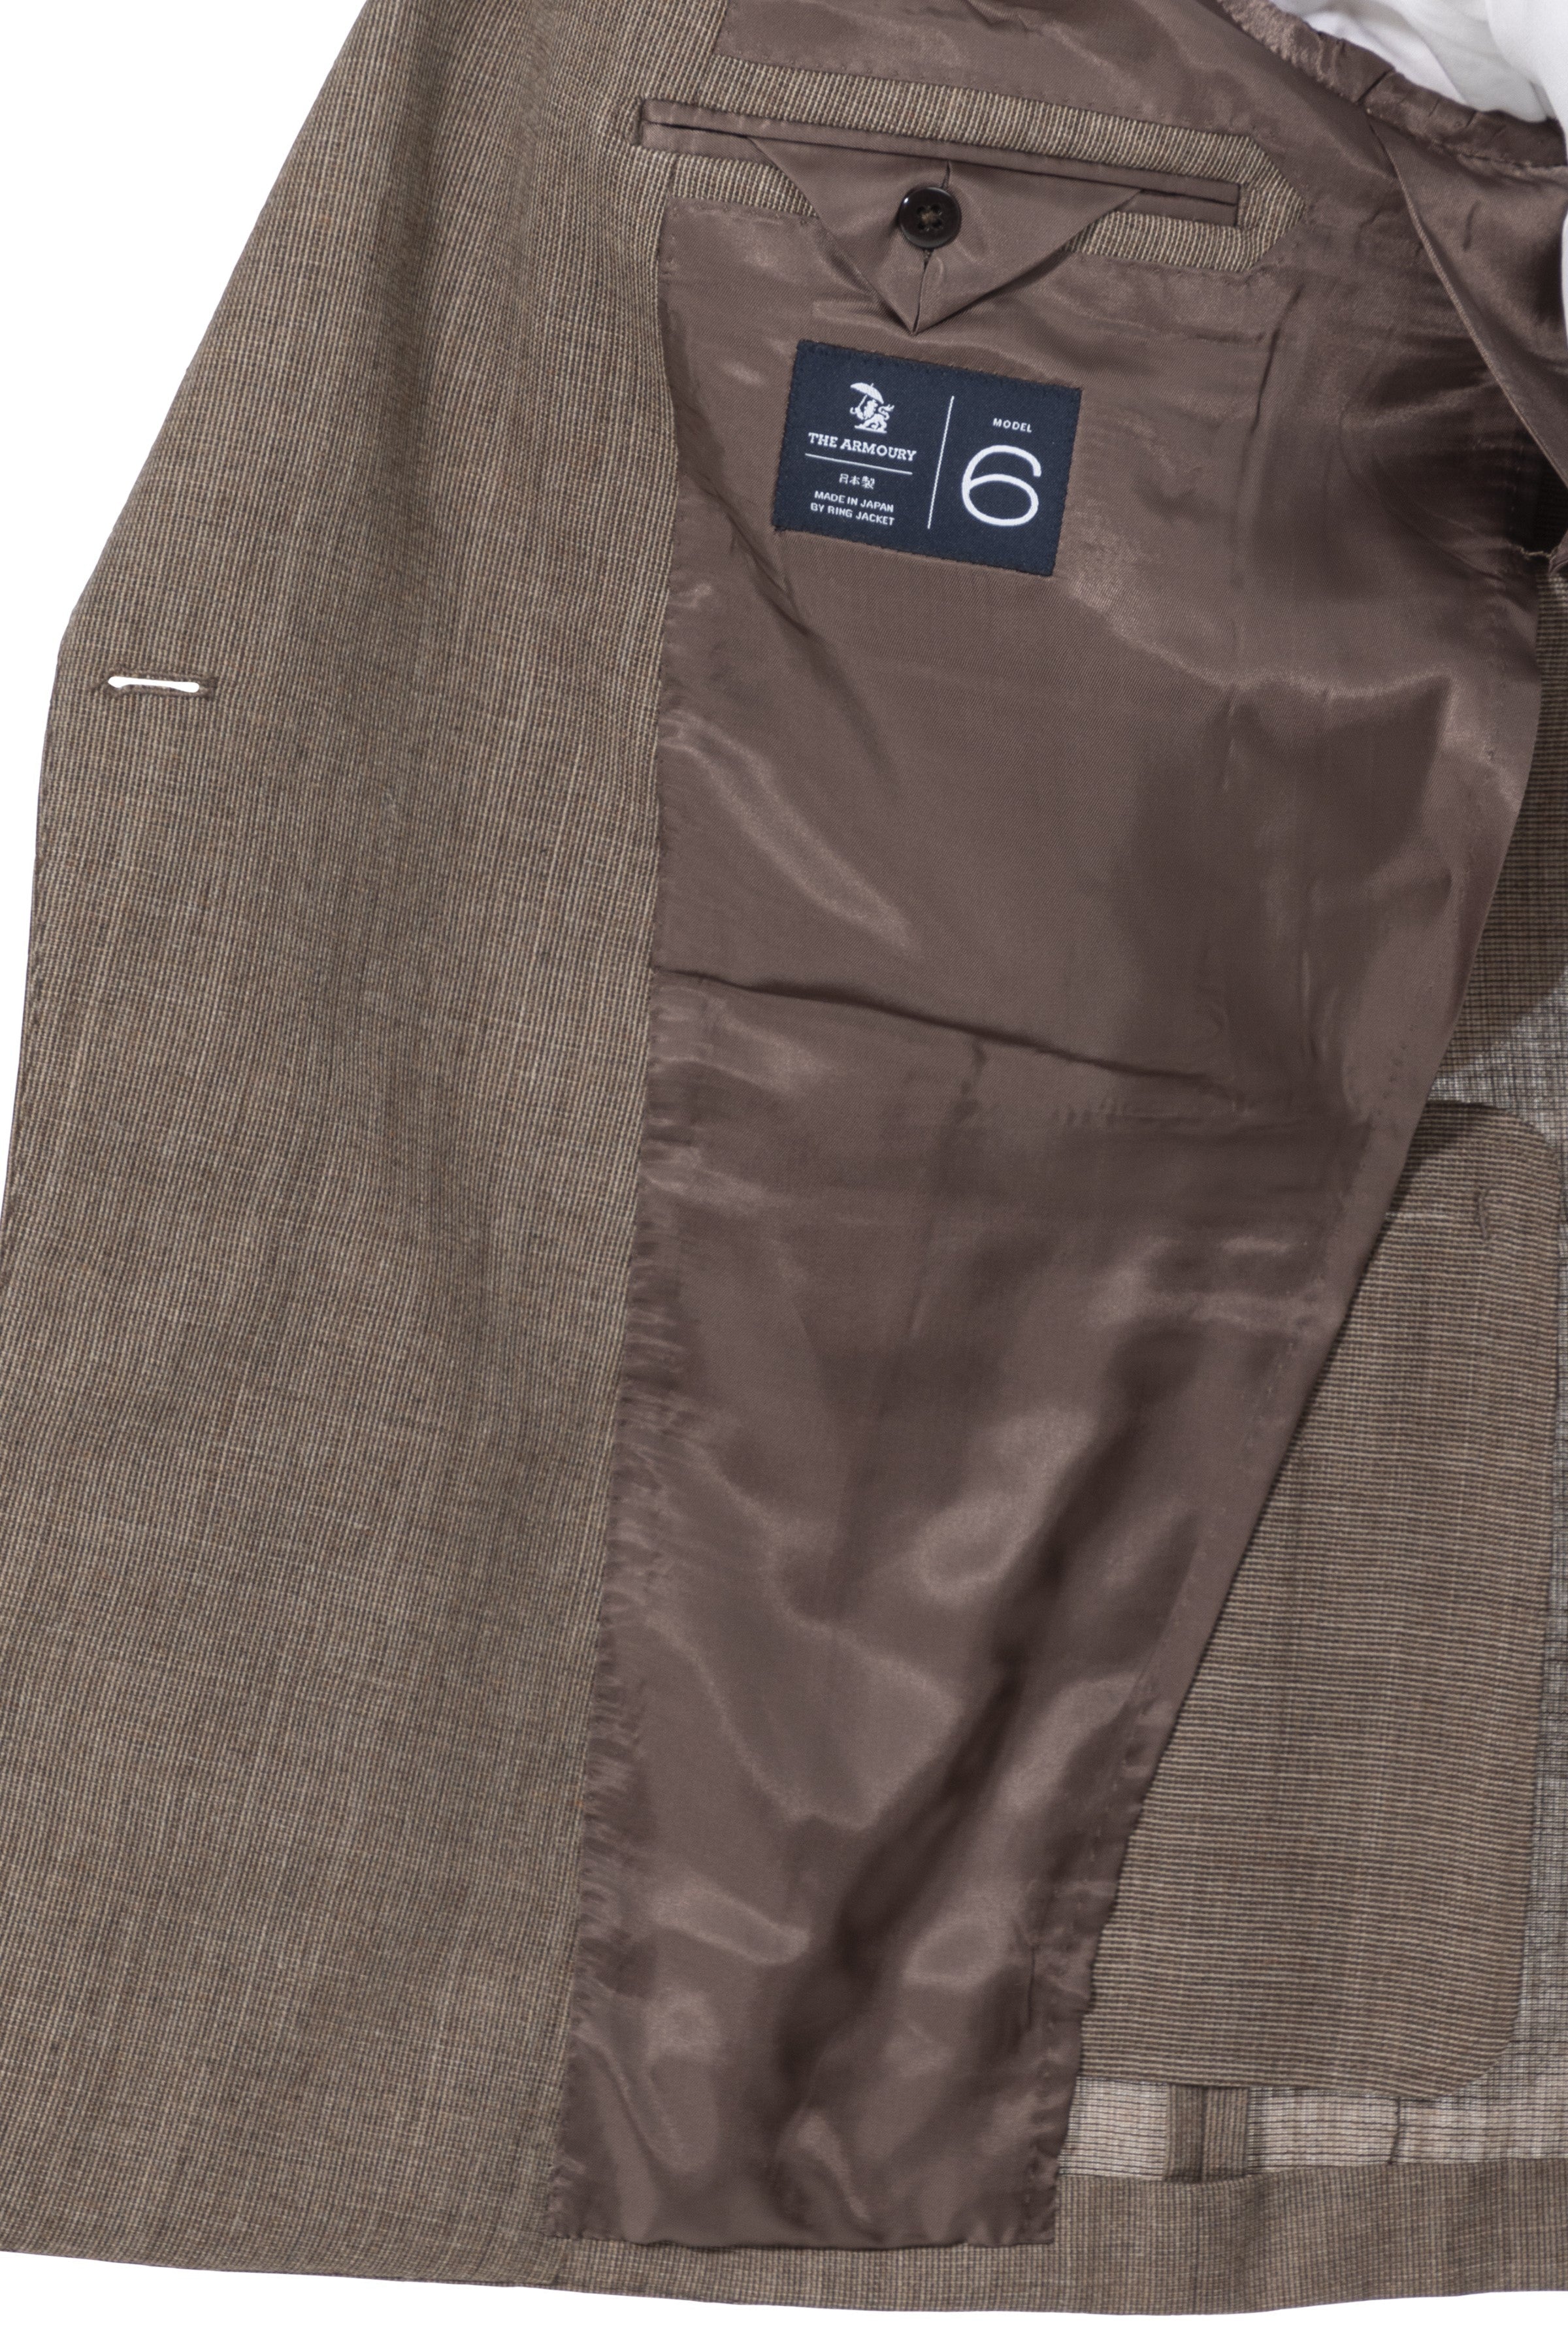 The Armoury by Ring Jacket Model 6B Beige-brown Fox Air Wool Suit